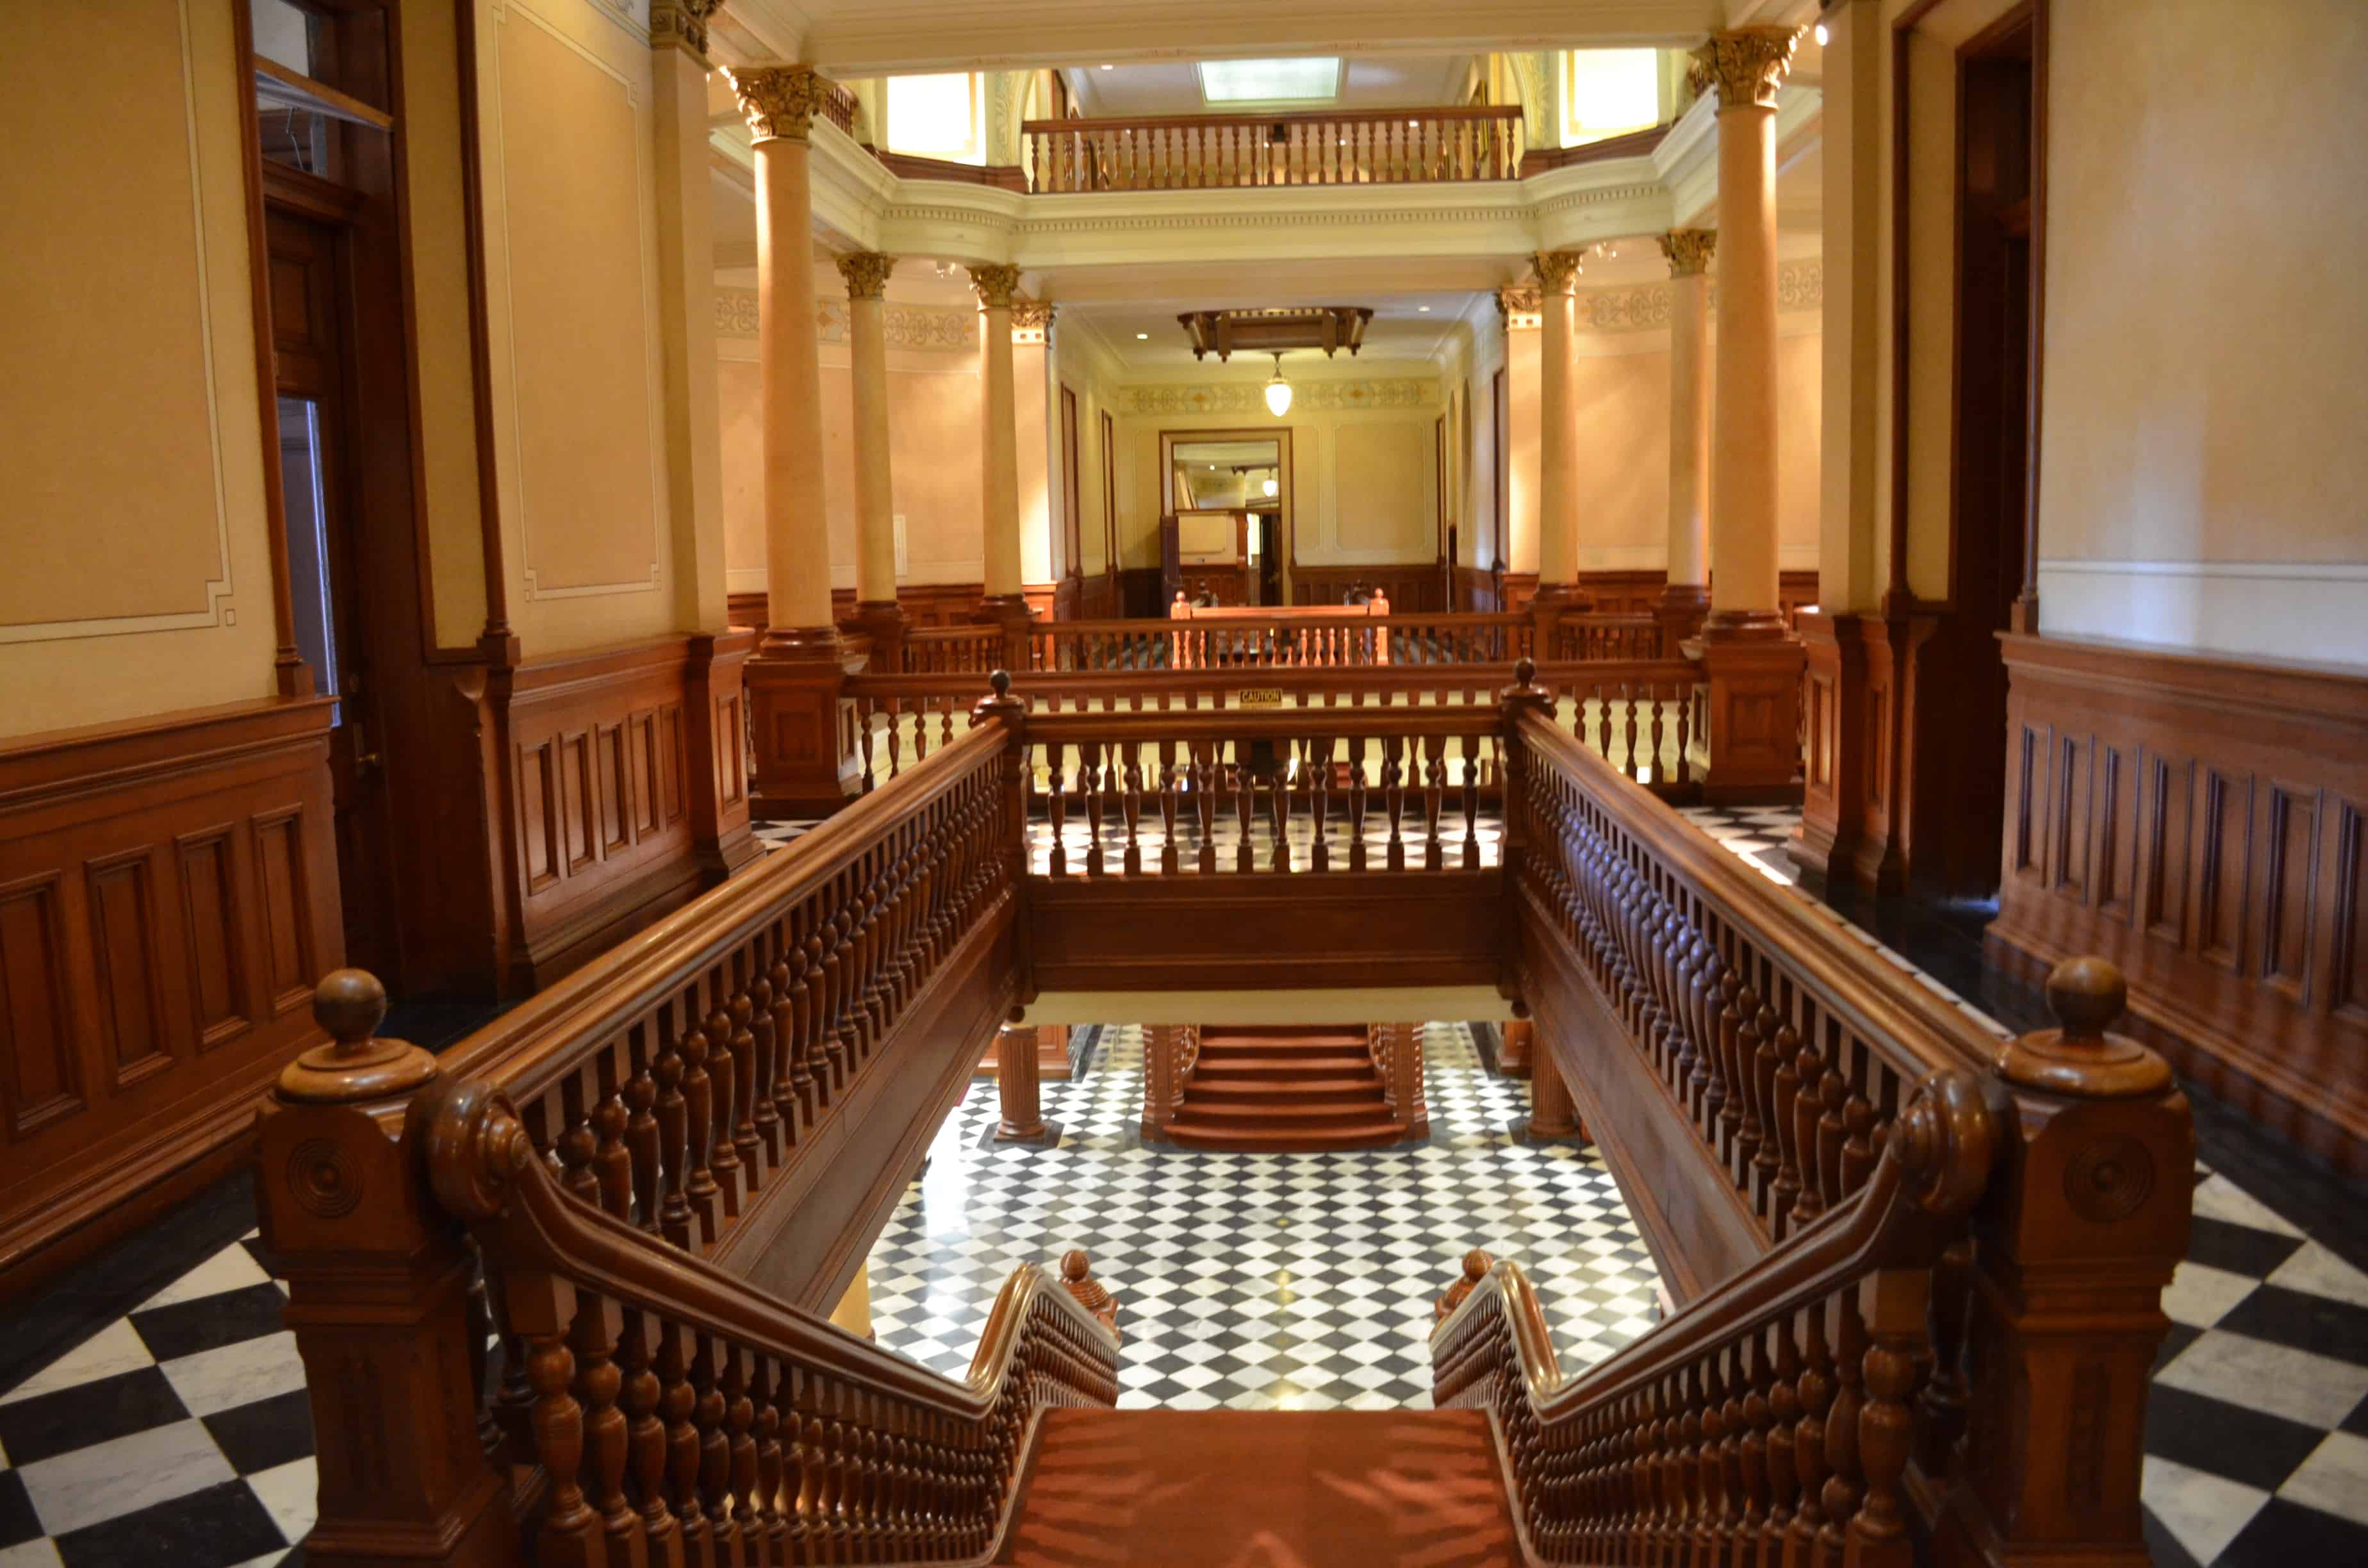 Second floor at the Wyoming State Capitol in Cheyenne